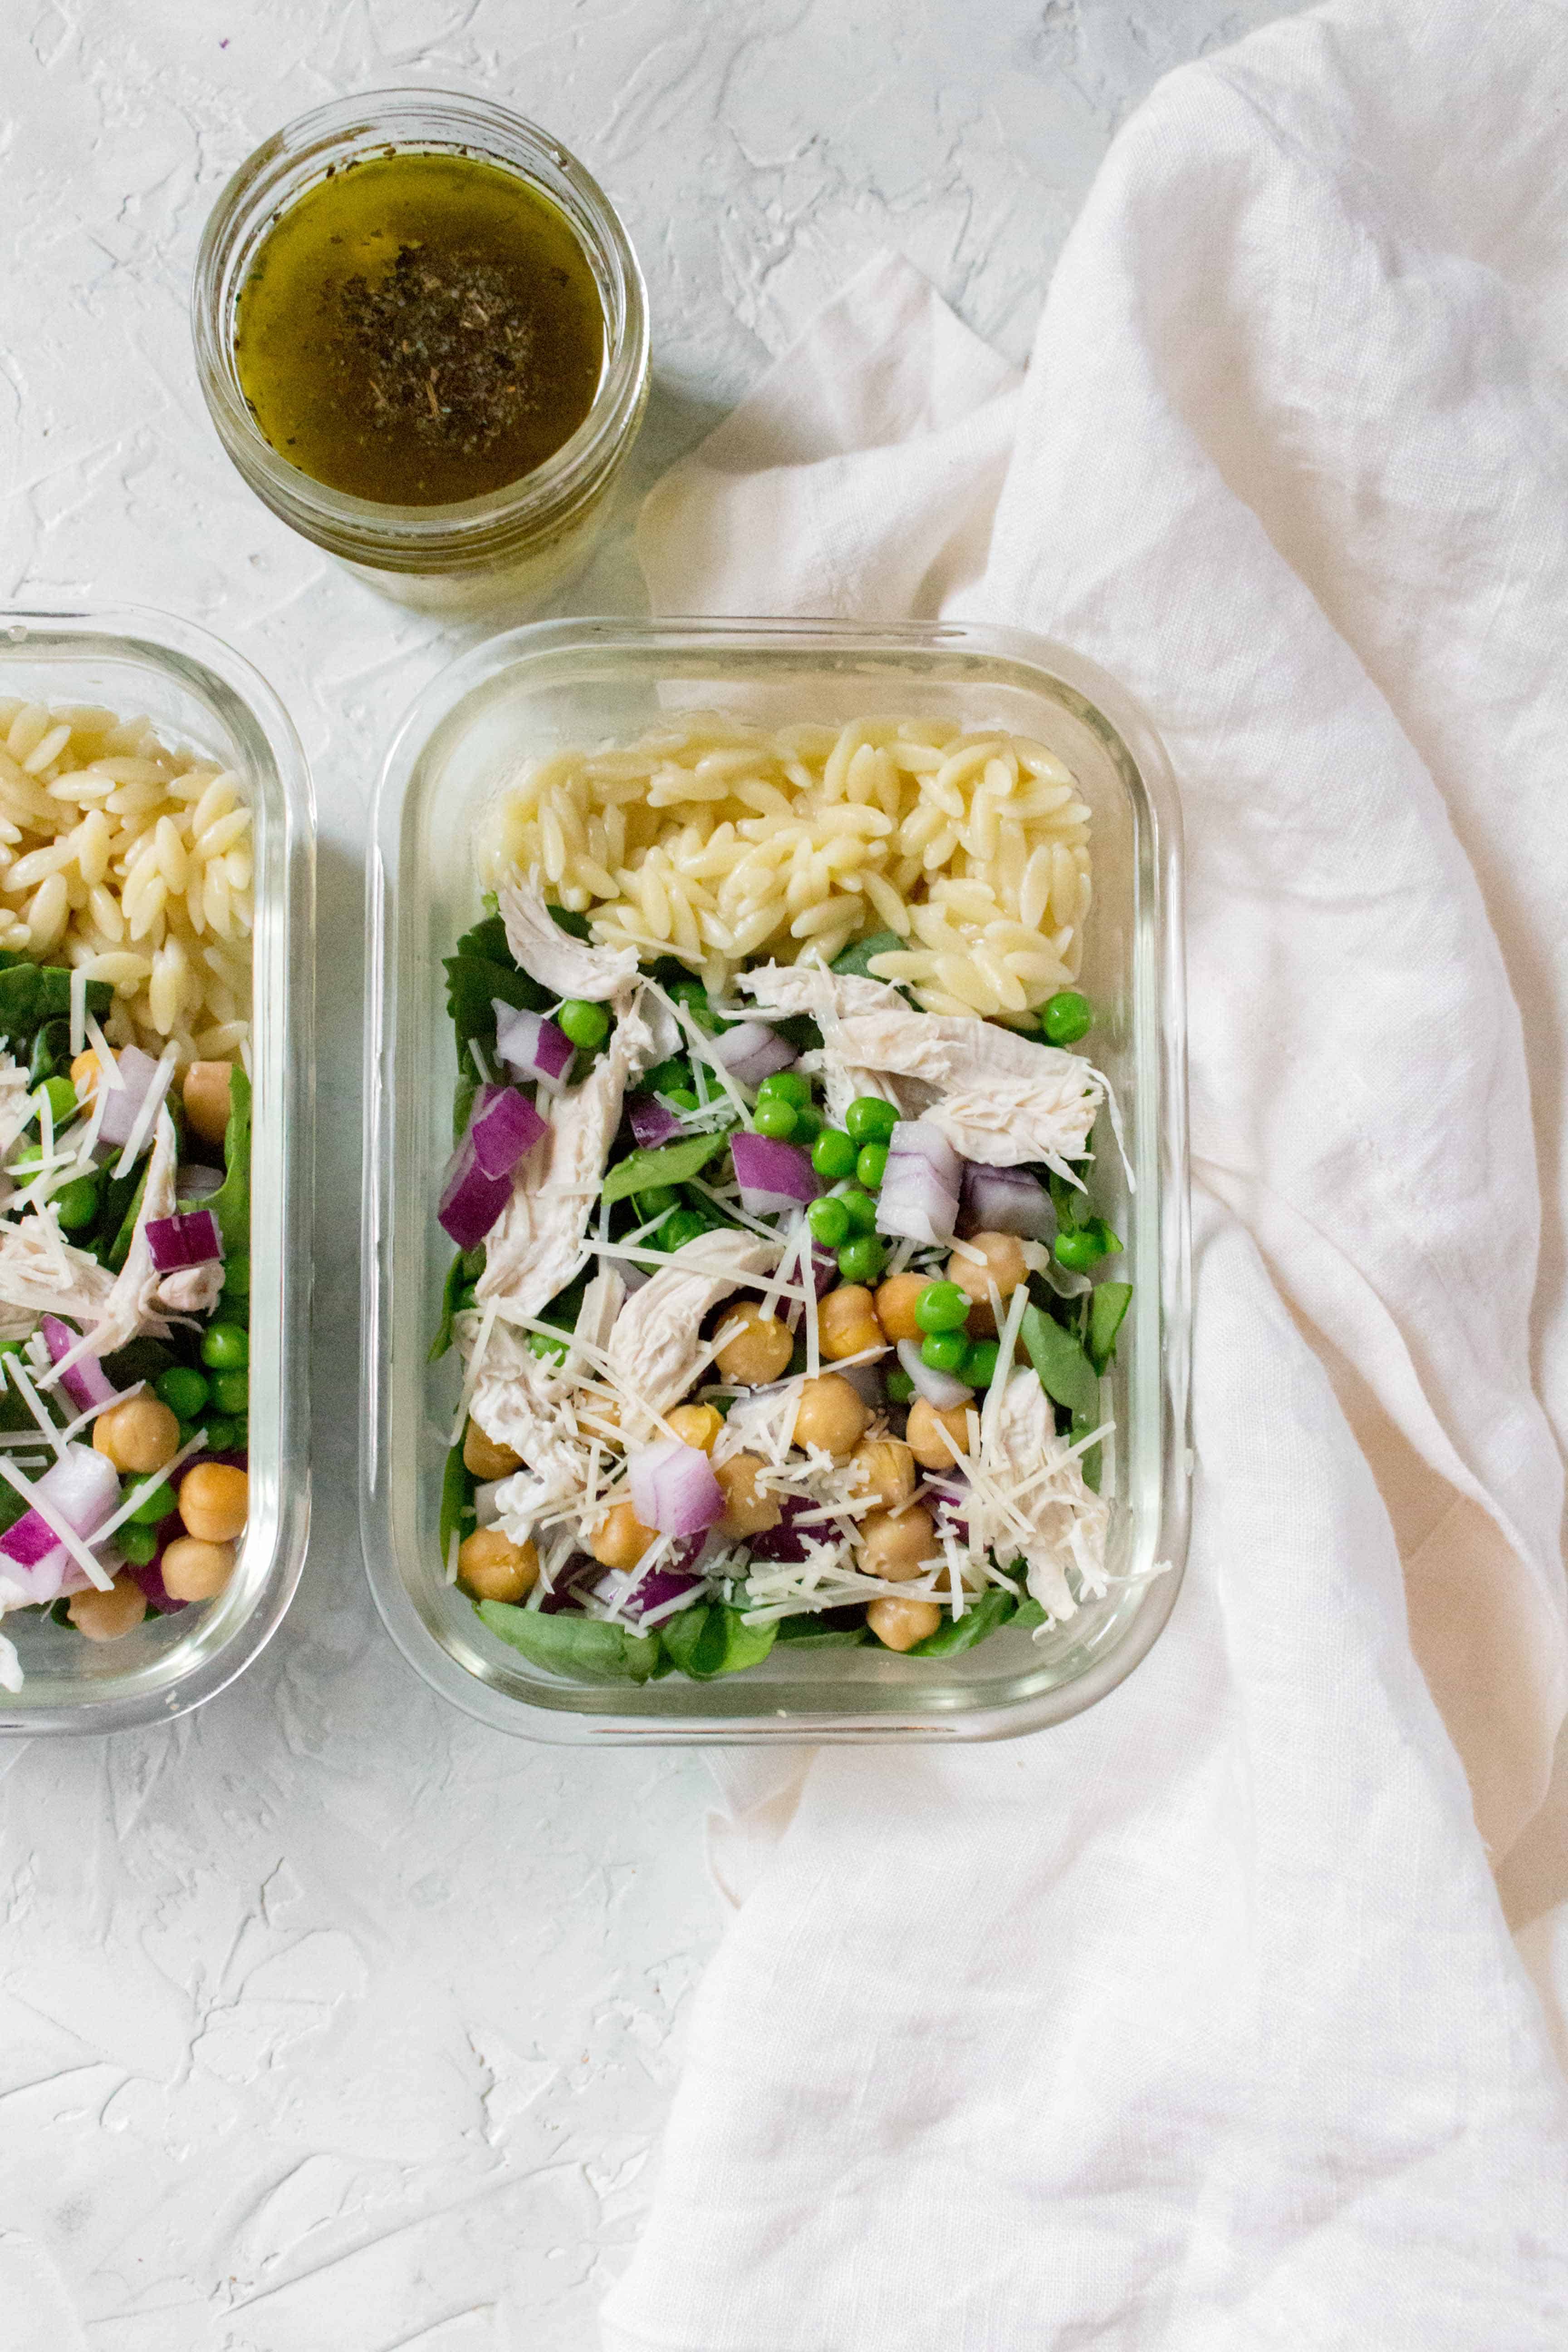 Salads don't have to be boring! Here's a delicious and hearty Orzo Salad Meal Prep for you to try this week! This orzo meal prep is the perfect cold work lunch as its filling and packed with healthy goodness! No boring iceberg lettuce here.